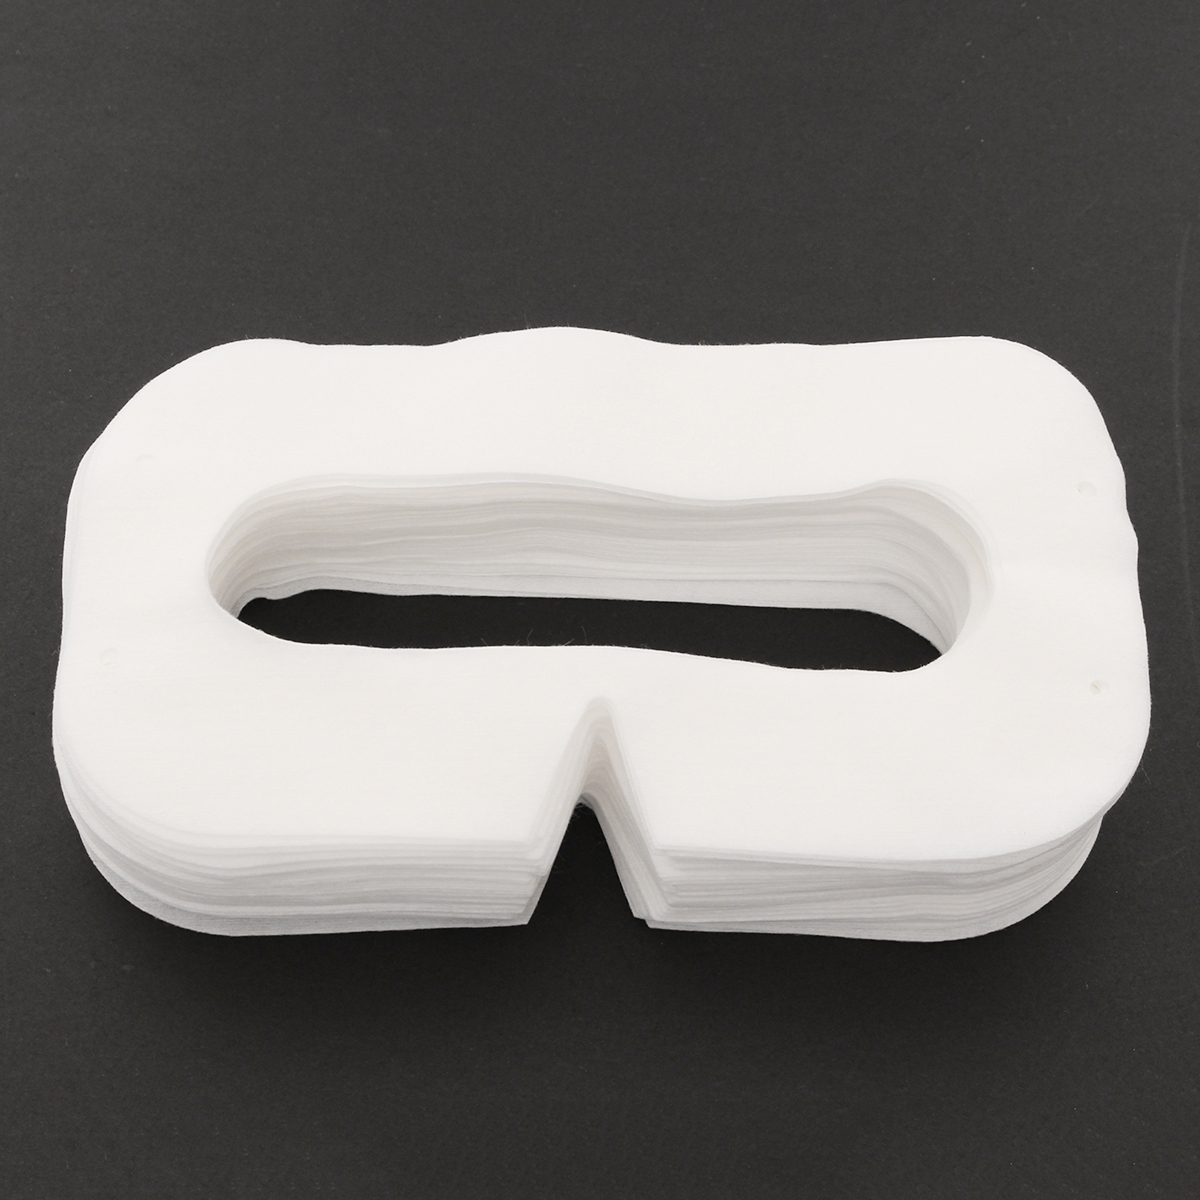 50 PCS Disposable Hygiene Eye pad Face Mask for HTC Vive for PlayStation VR Headset 7